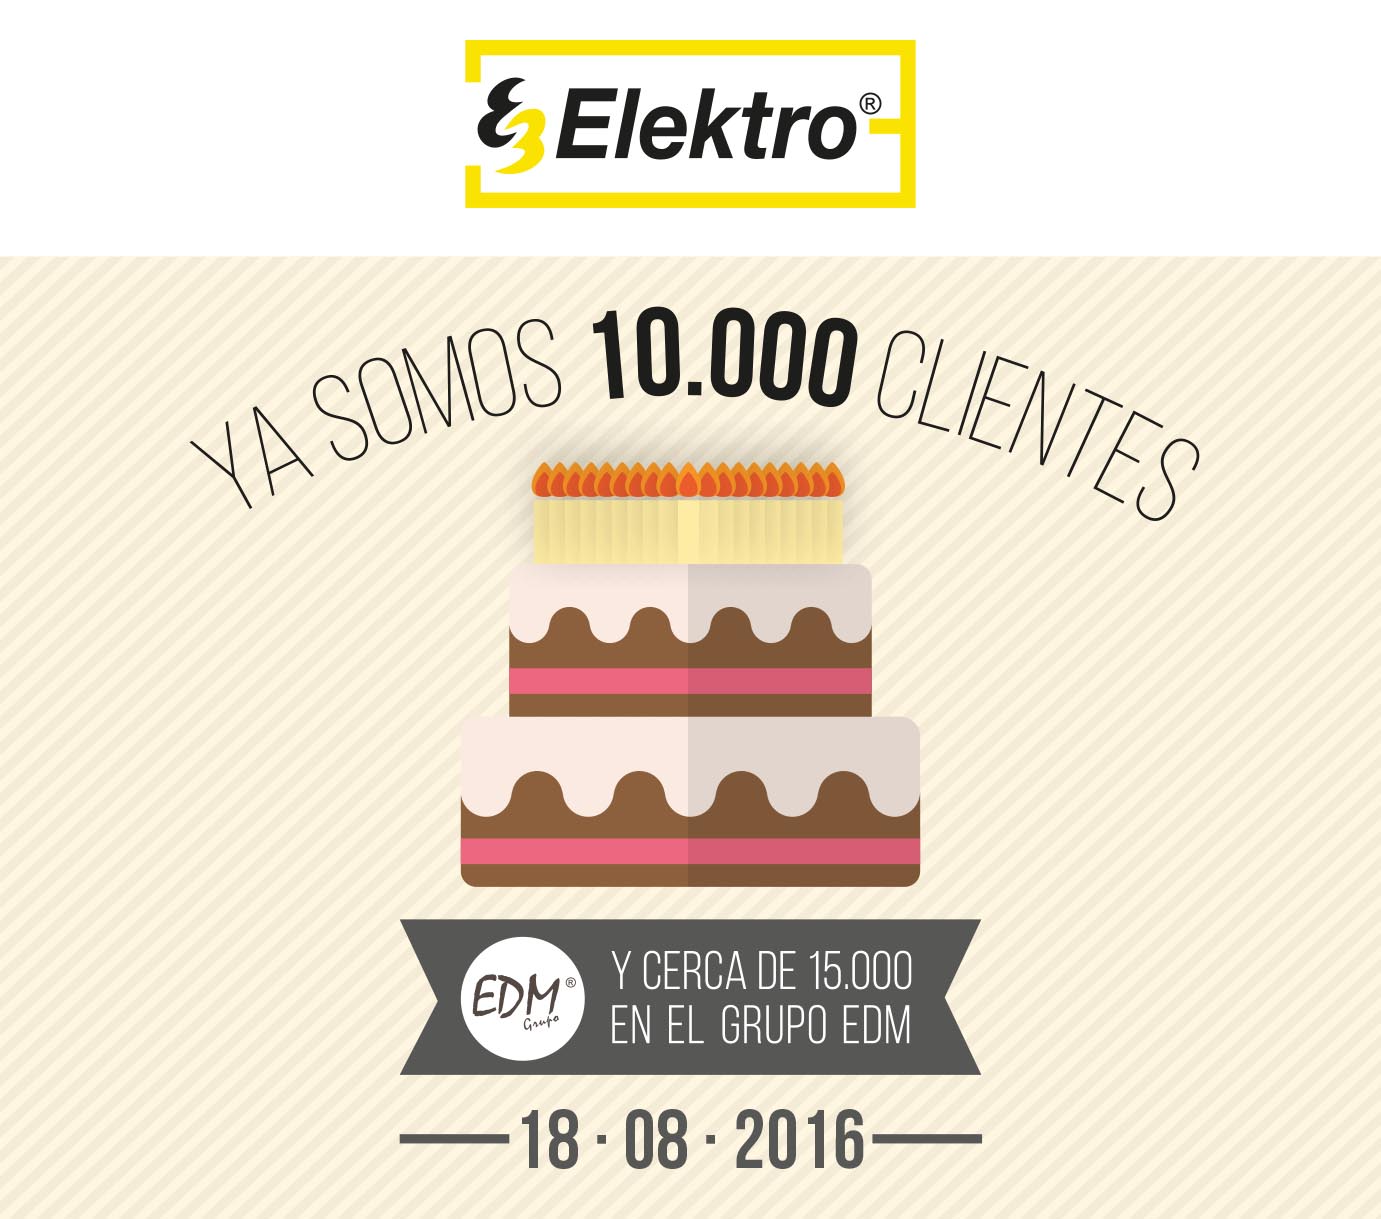 10,000 Thanks to our 10,000 Customers !!!